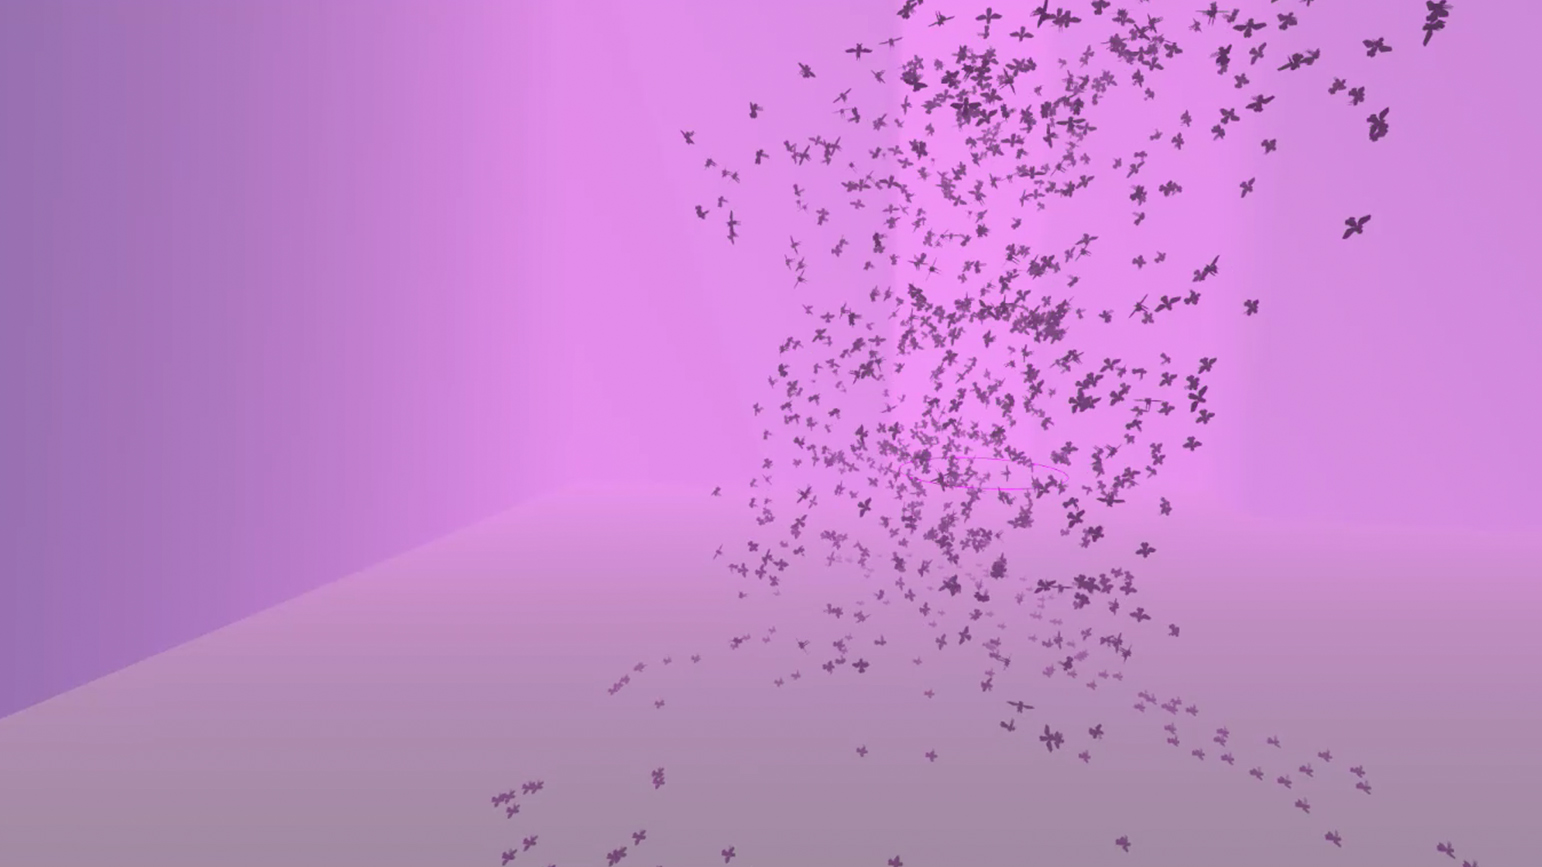 Computer generated images of a swarm of birds against a pink background.